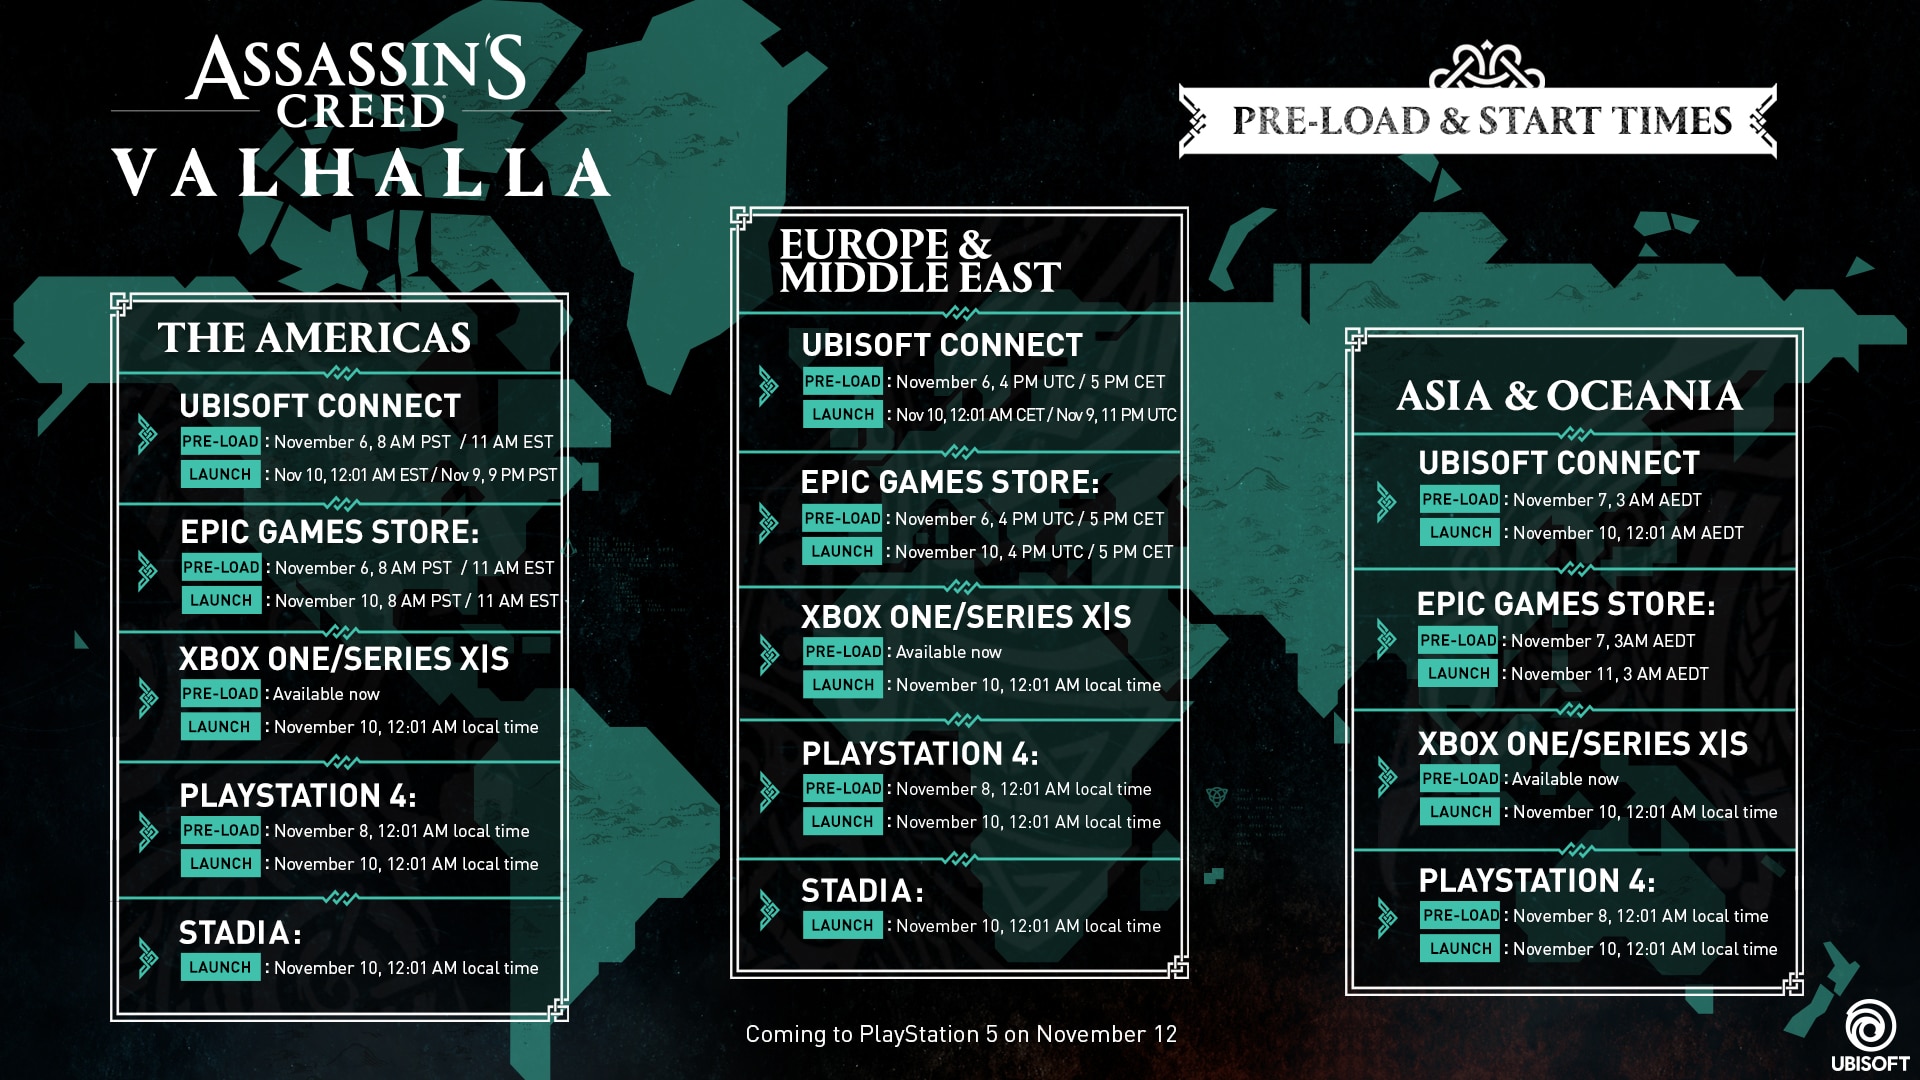 Assassin's Creed Valhalla - Launch map